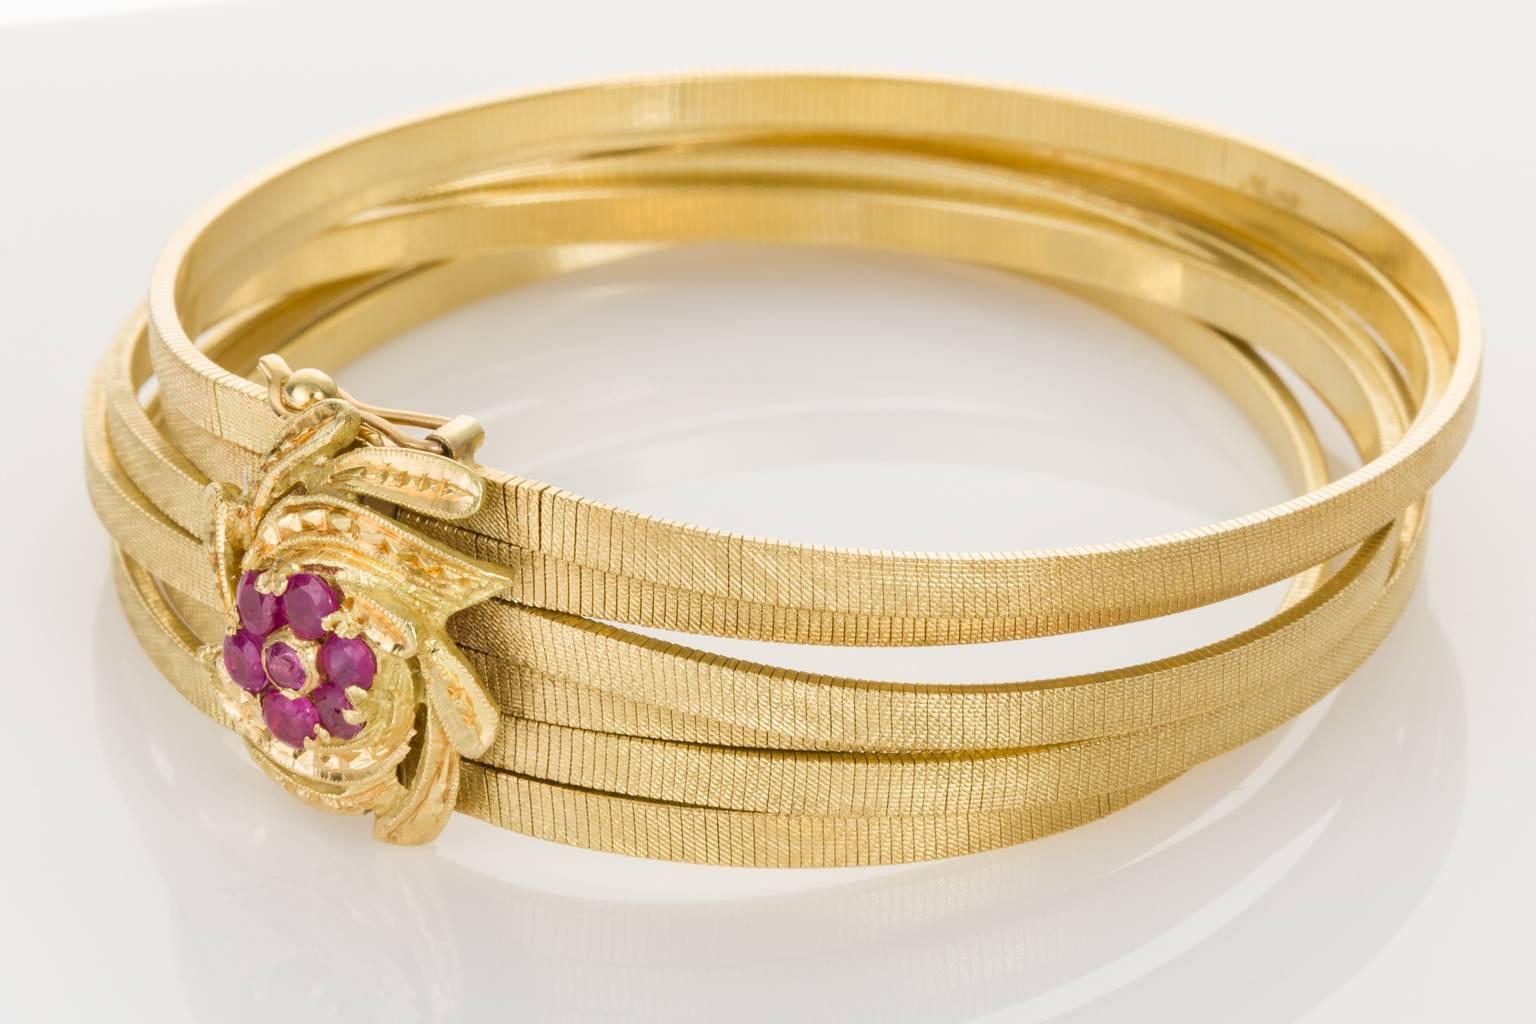 Nearly like liquid gold, these six 18k yellow gold strands have a beautiful sheen and are so smooth and fluid on the wrist. Fastened with a gold rosette motif centred with a flower of 7 round cut pinkish/red rubies, it's elegant and stylish for any